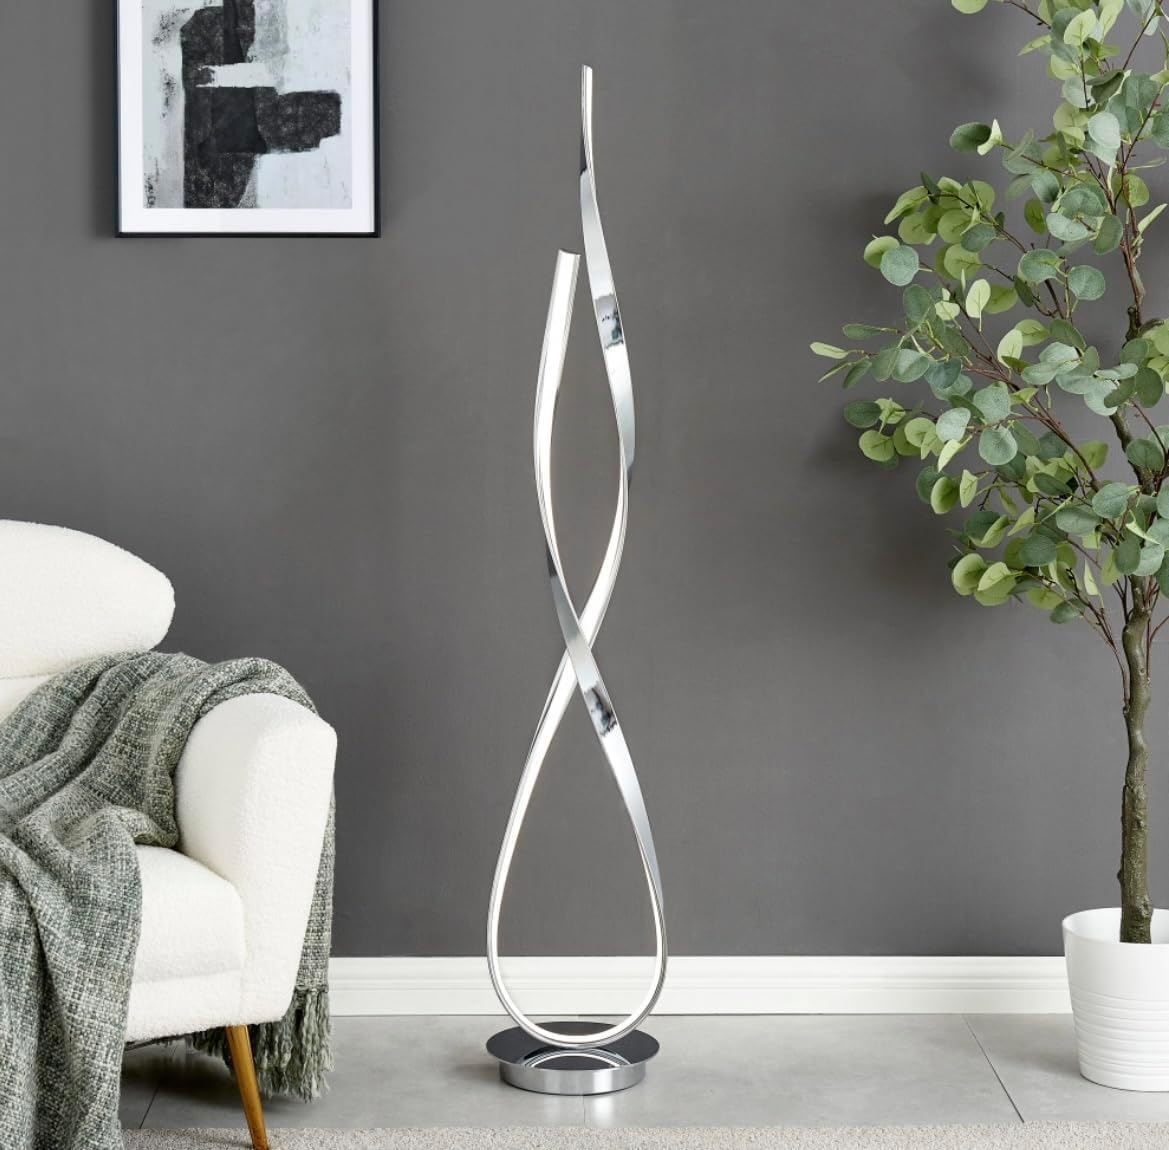  New Dimmable Twisted Floor Lamp LED - Buy New Dimmable Twisted Floor Lamp LED in Dubai - HOCC Dubai - Baby playground outdoor - Shop baby product - Shop Pet product - shop home decor and lighting in Dubai - HOCC Dubai - Baby playground outddoor - Shop ba